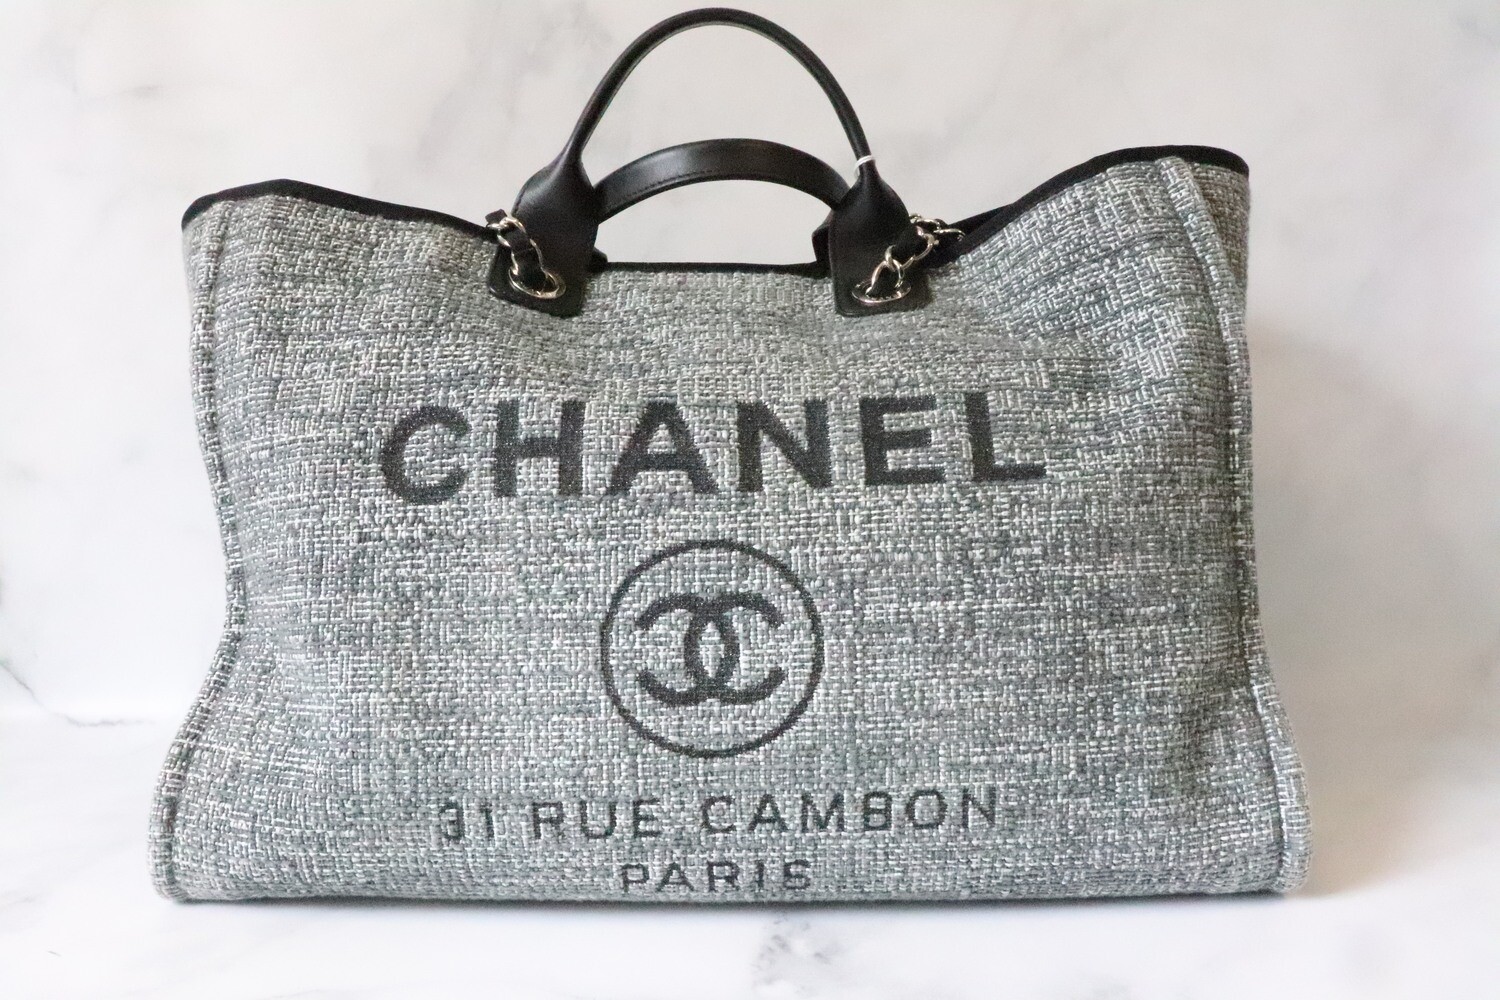 Chanel Deauville, Tweed Charcoal Grey Black with Silver Hardware, Preowned  in Dustbag - Julia Rose Boston